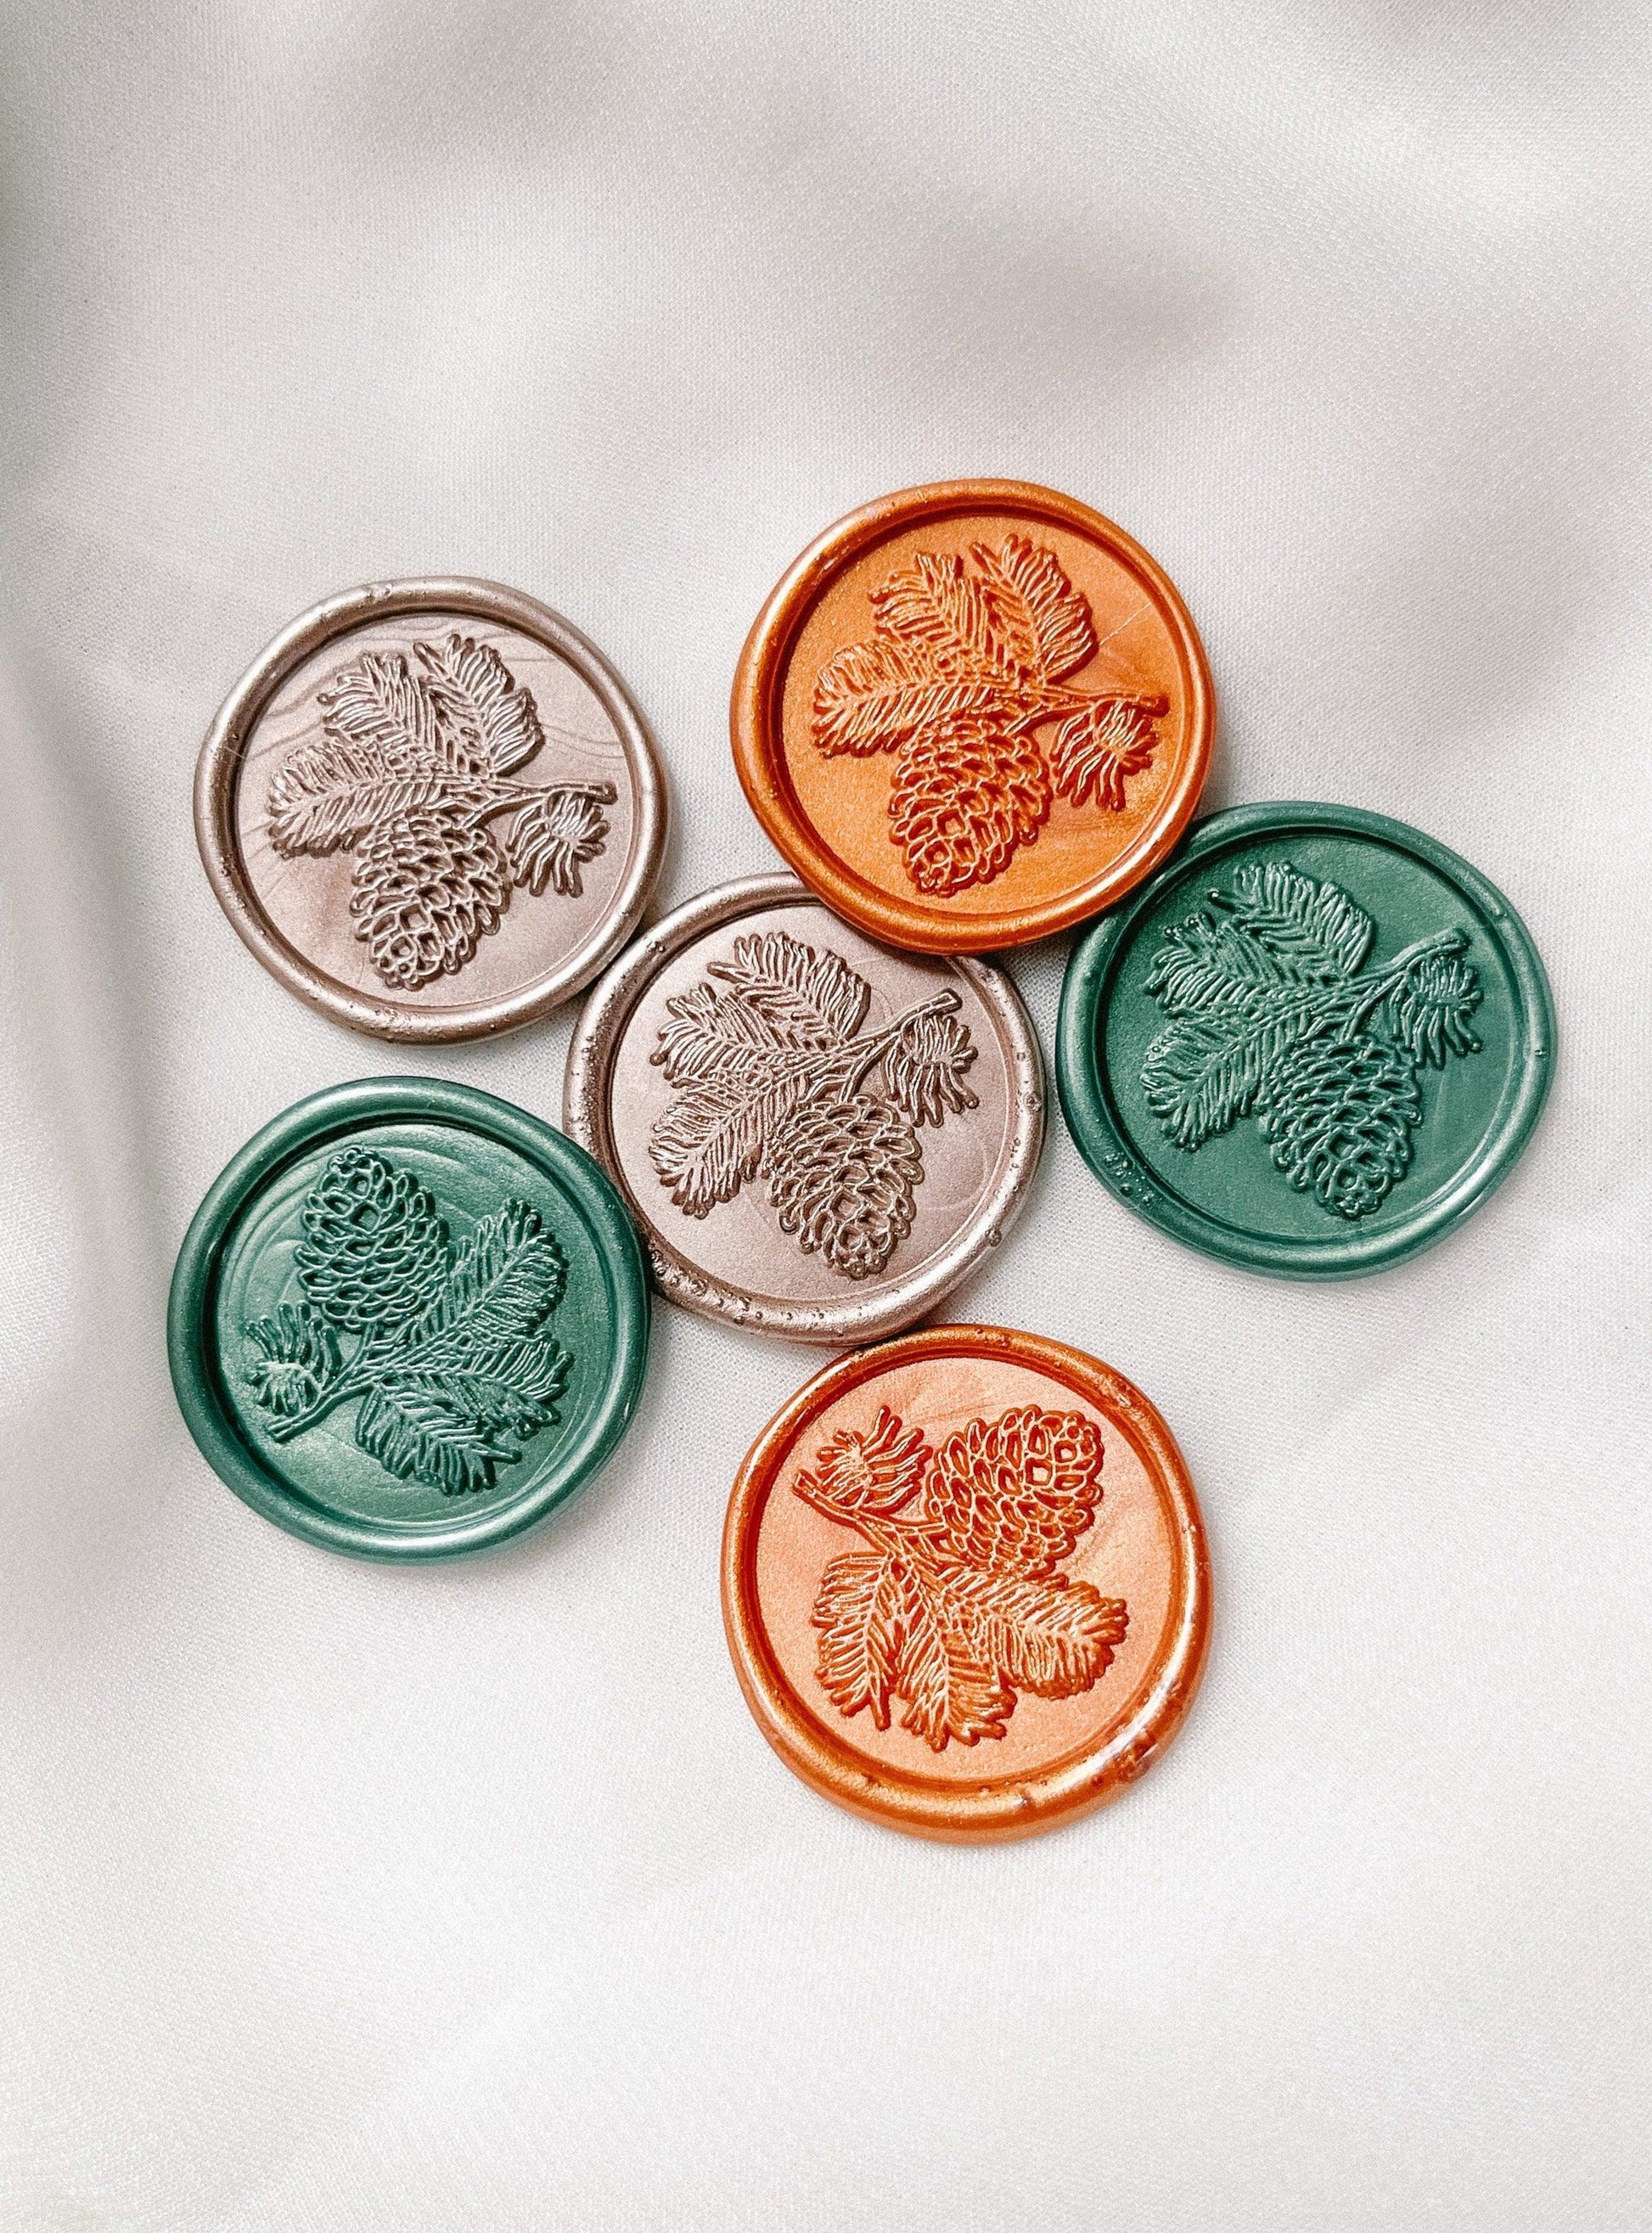 Pinecone wax seals - Set of 9 - Made of Honour Co.